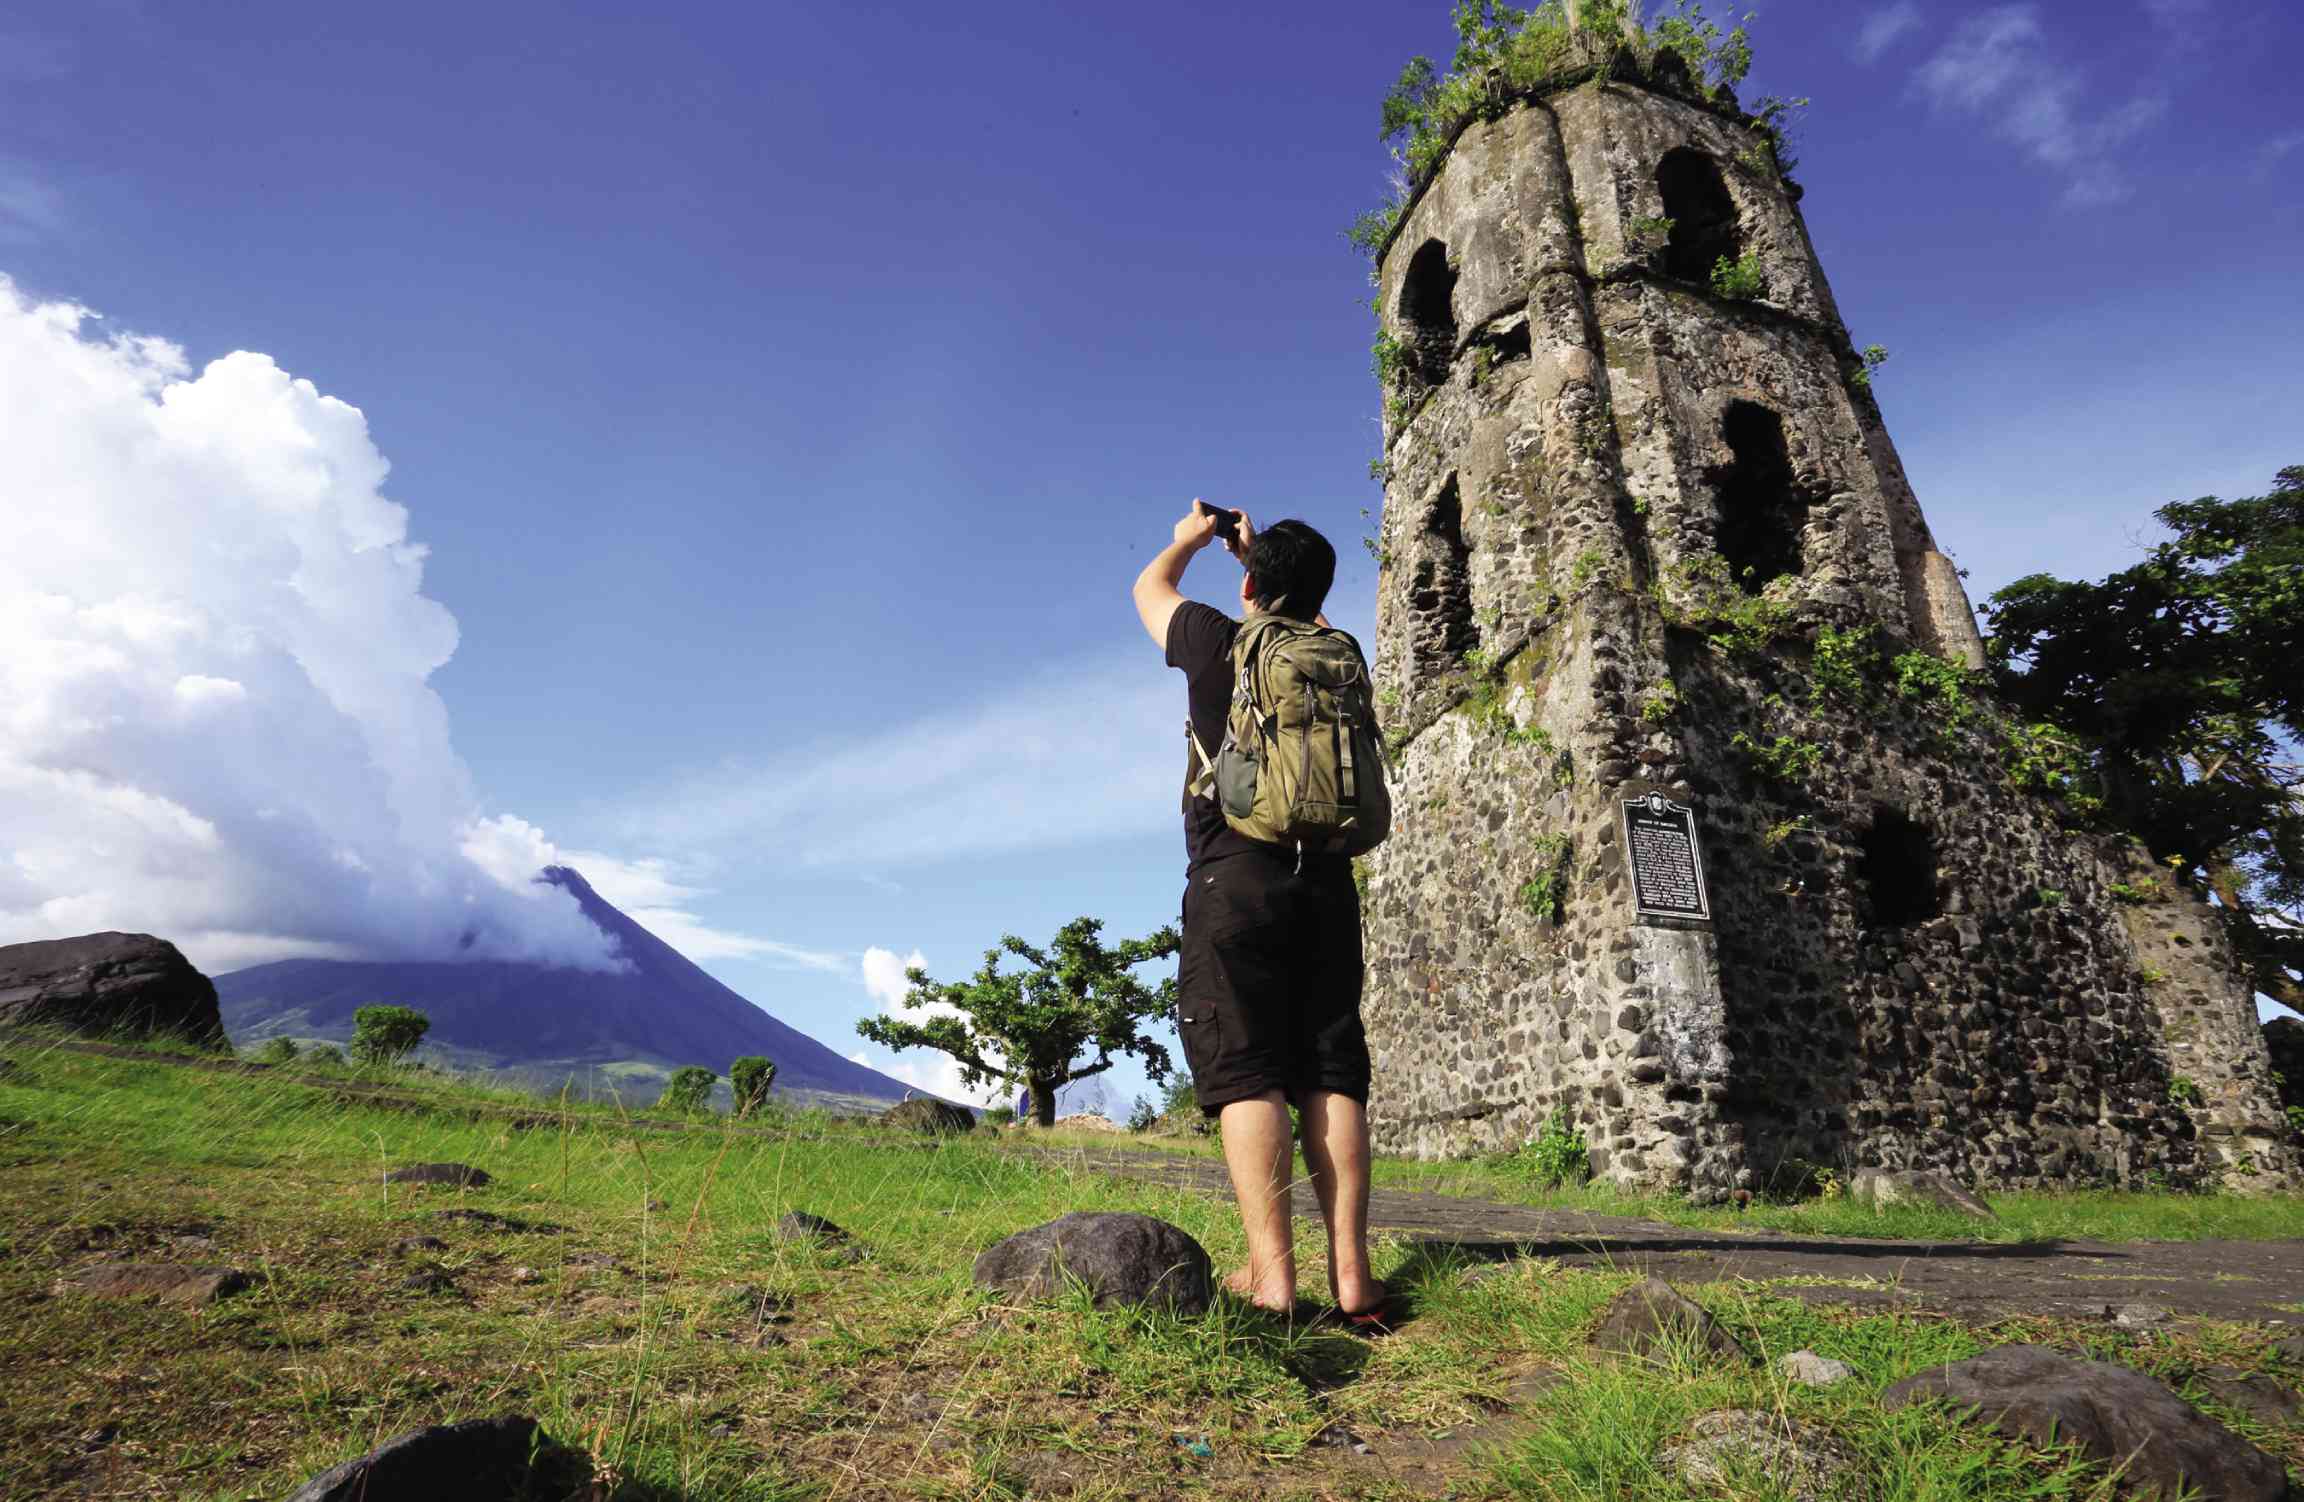 what type of volcano is mount mayon give three 3 important details of mount mayon eruption mayon volcano eruption what is the material being extruded by mount mayon where do you think did this material come from complete the following data file about mount mayon mayon volcano facts mount mayon justification is mayon volcano active